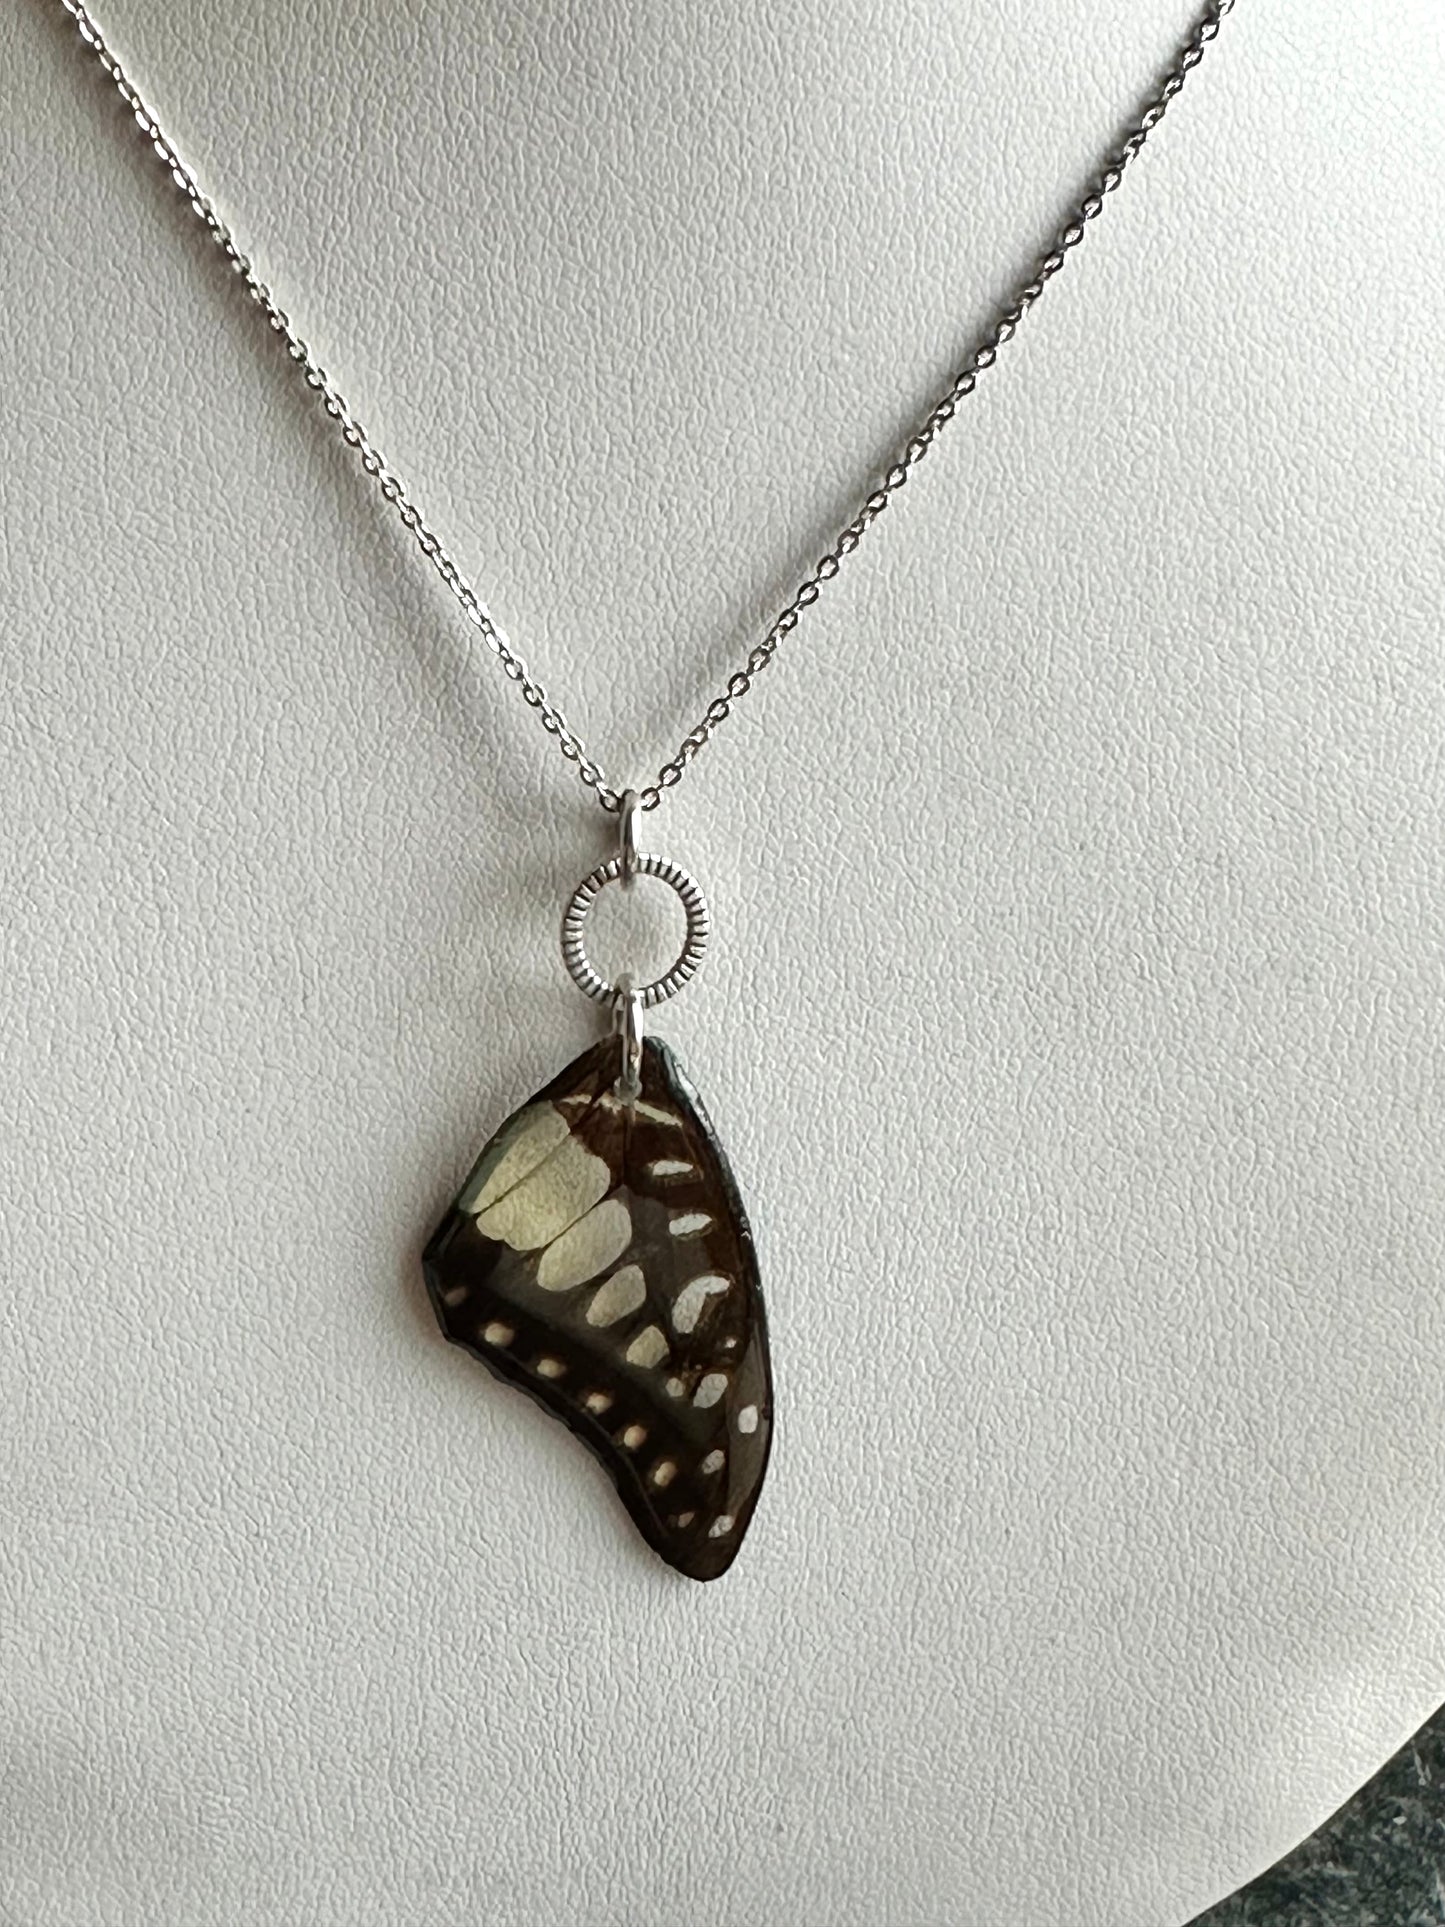 Real Common Jay Butterfly Wing Necklace Sterling Silver